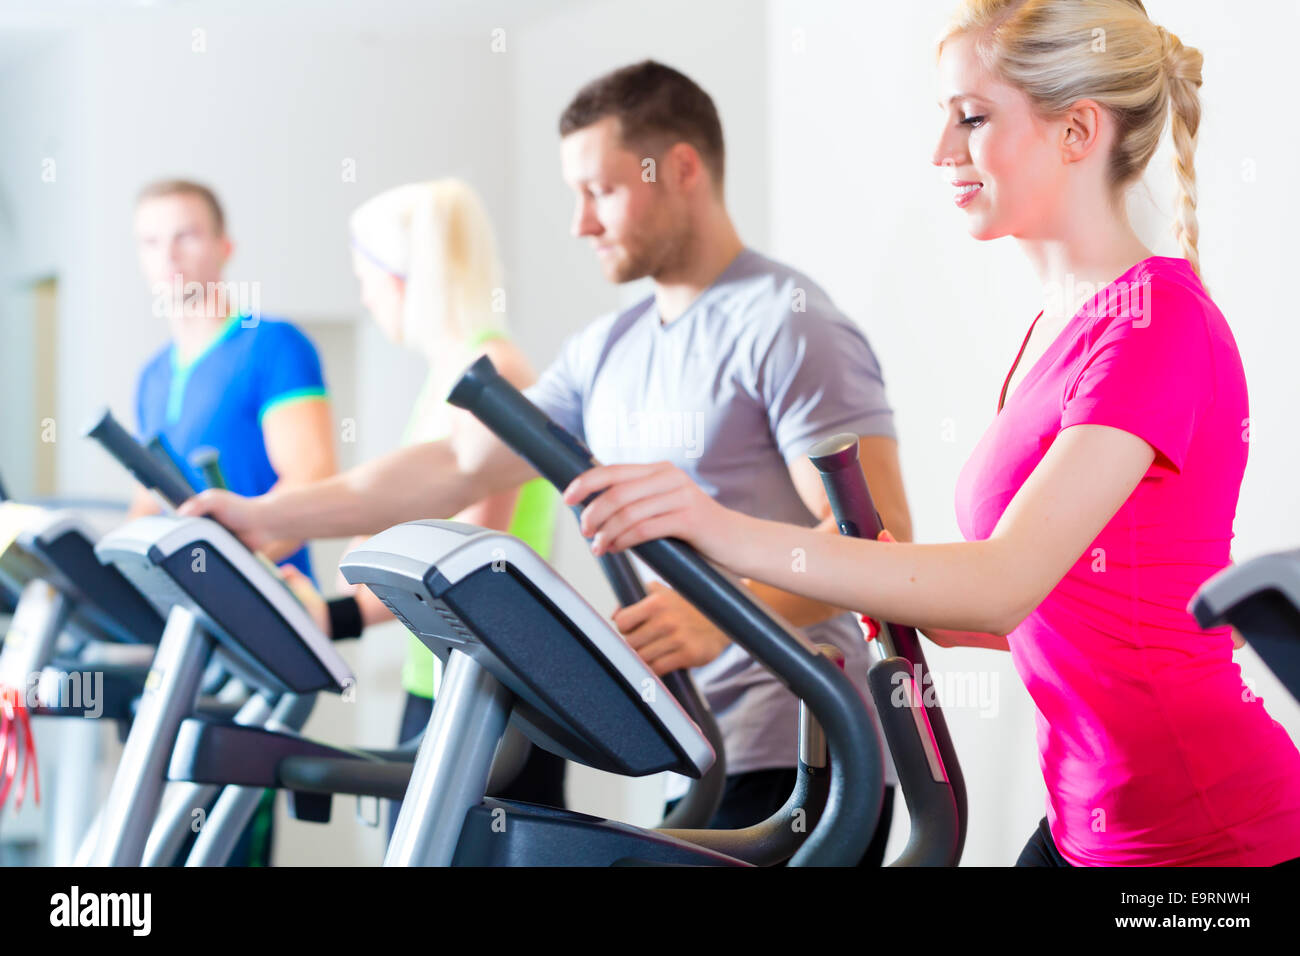 Group of fitness people in sport gym on treadmill Stock Photo - Alamy